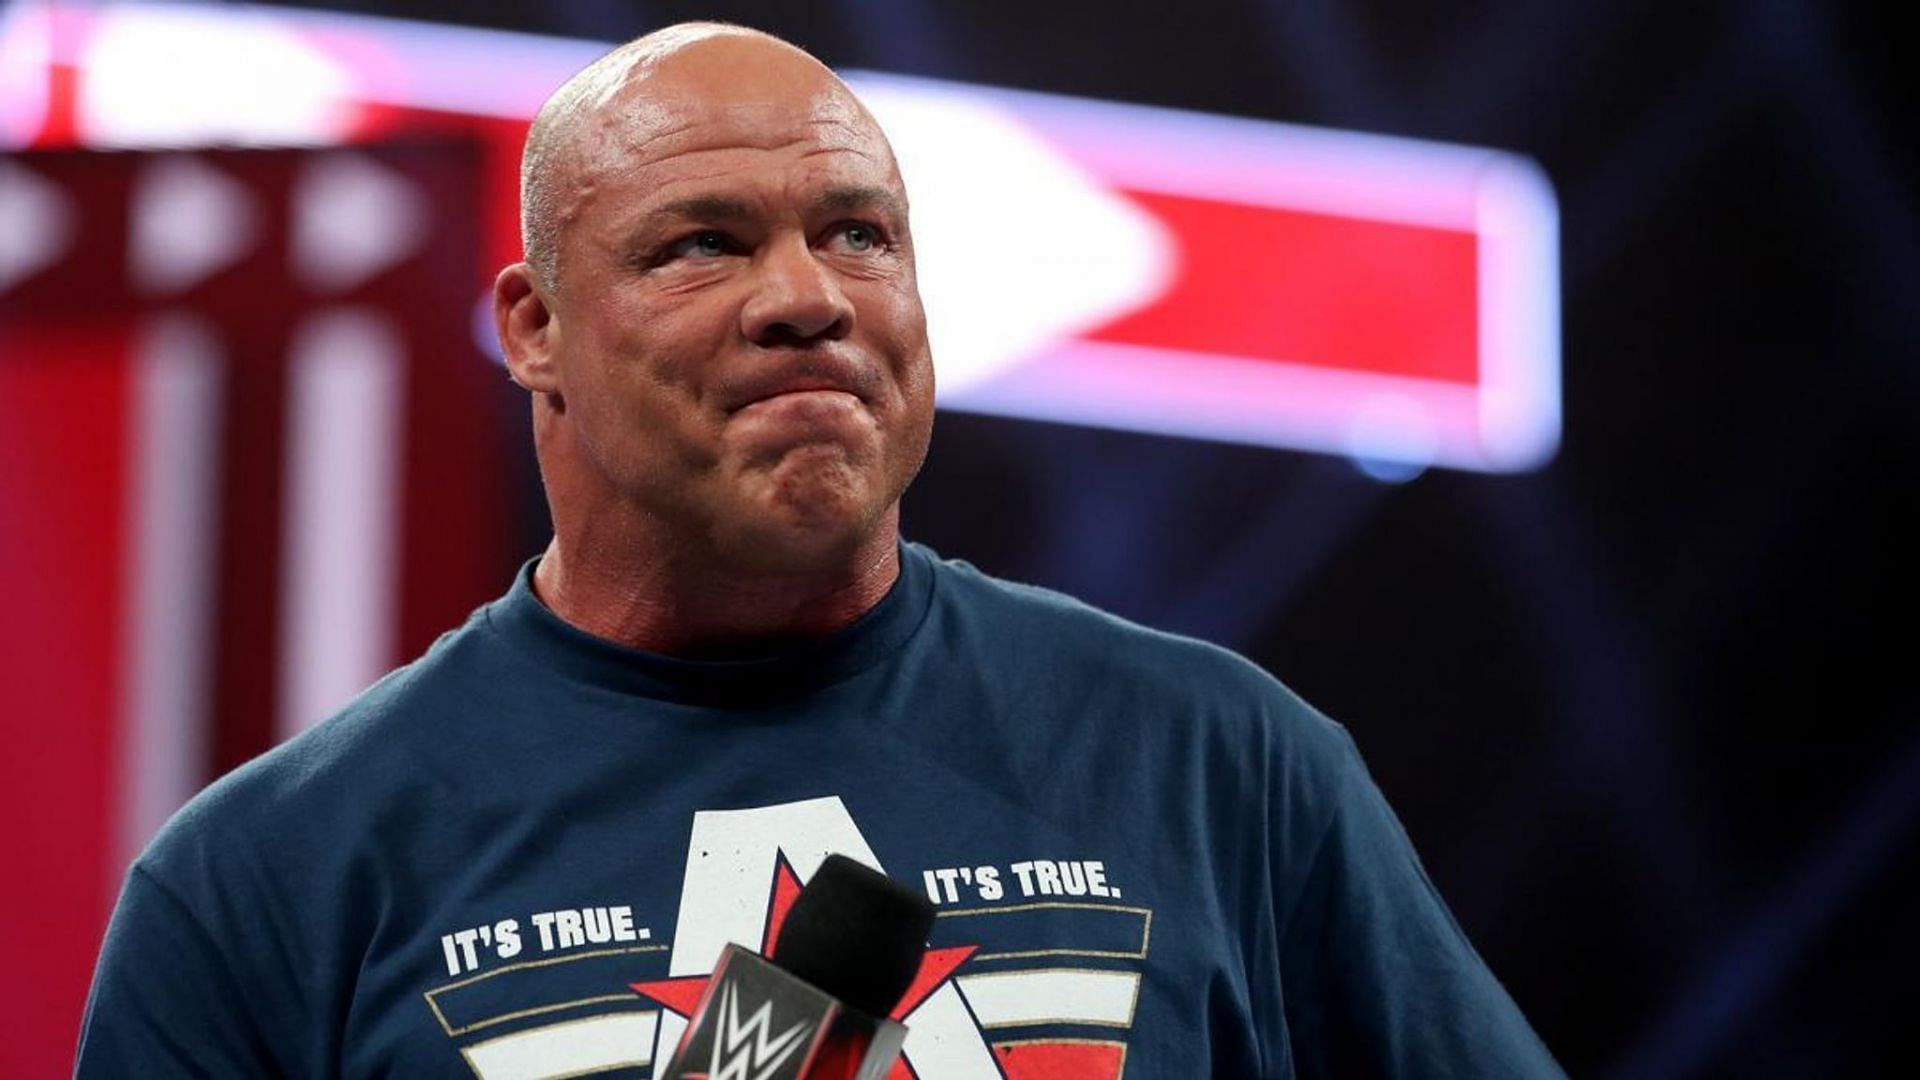 Kurt Angle opens up about leaving WWE in 2006